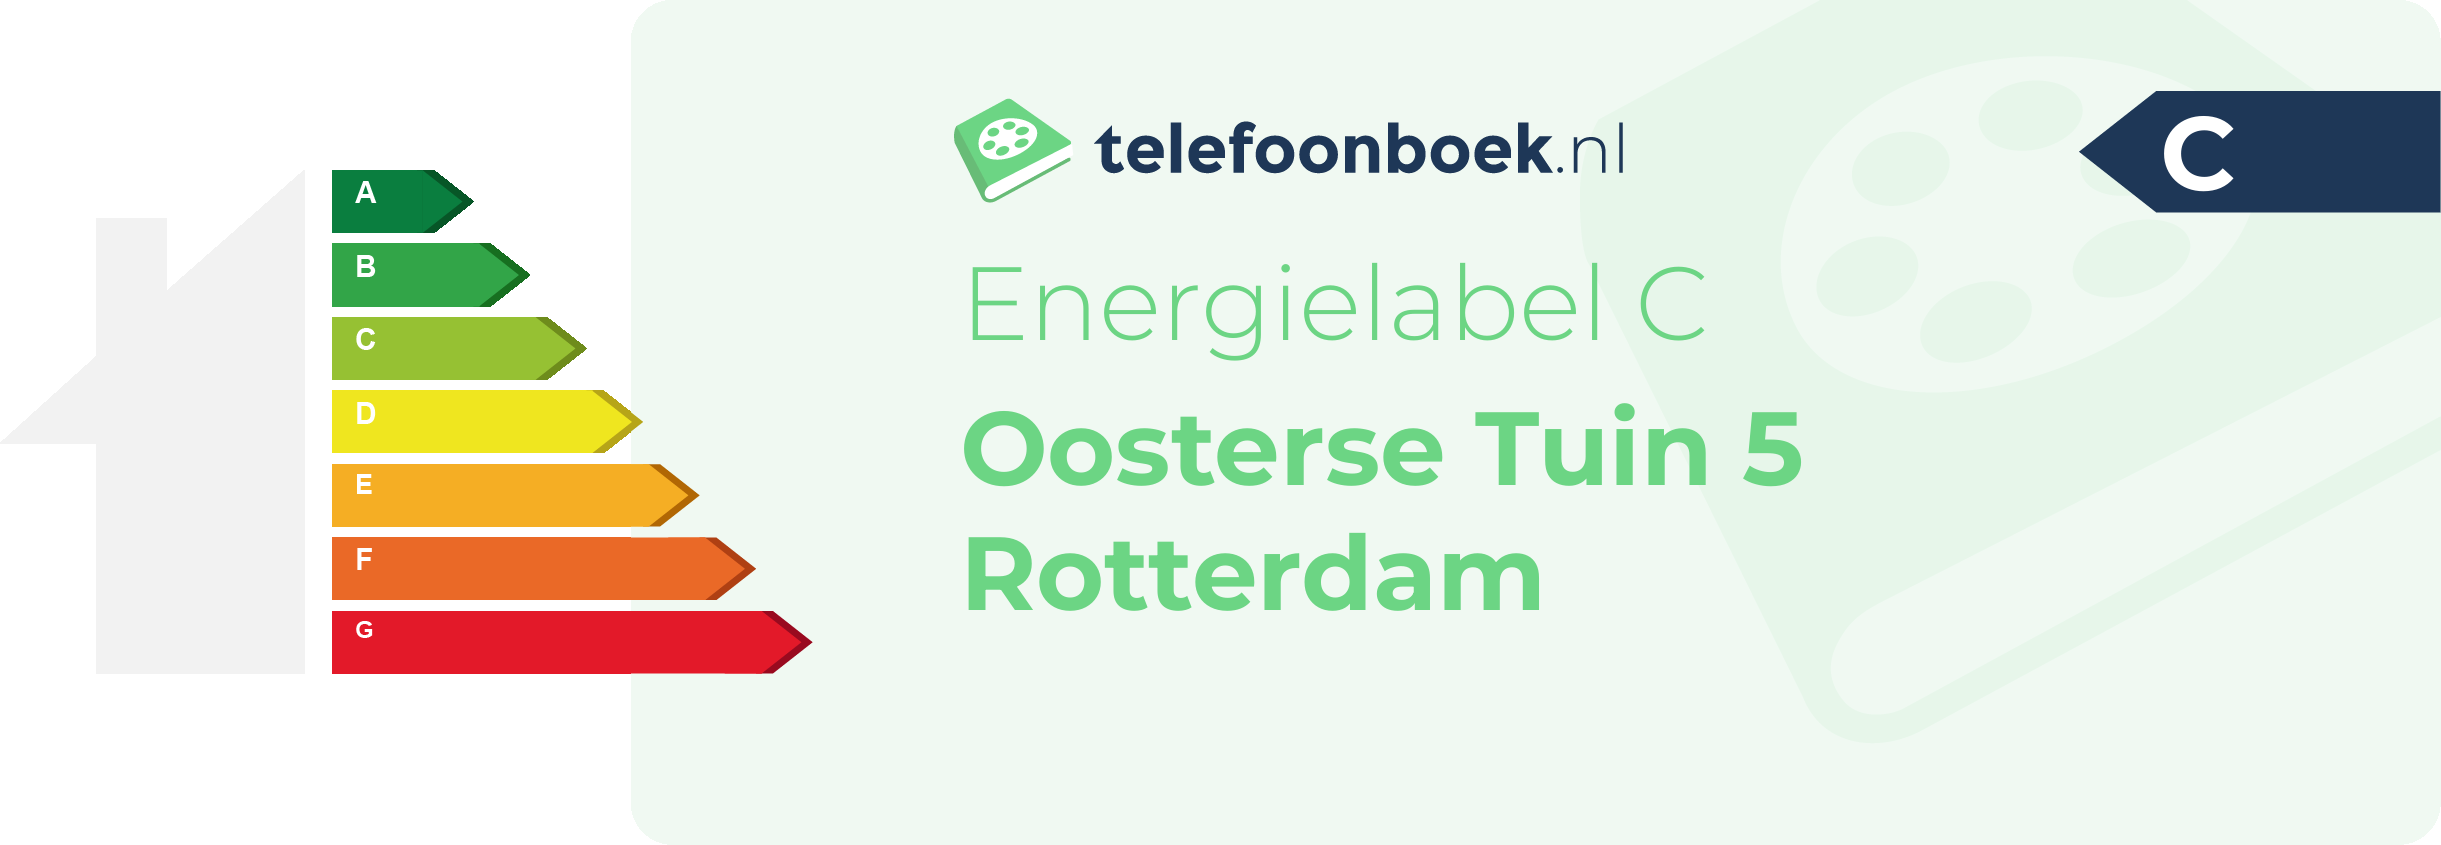 Energielabel Oosterse Tuin 5 Rotterdam